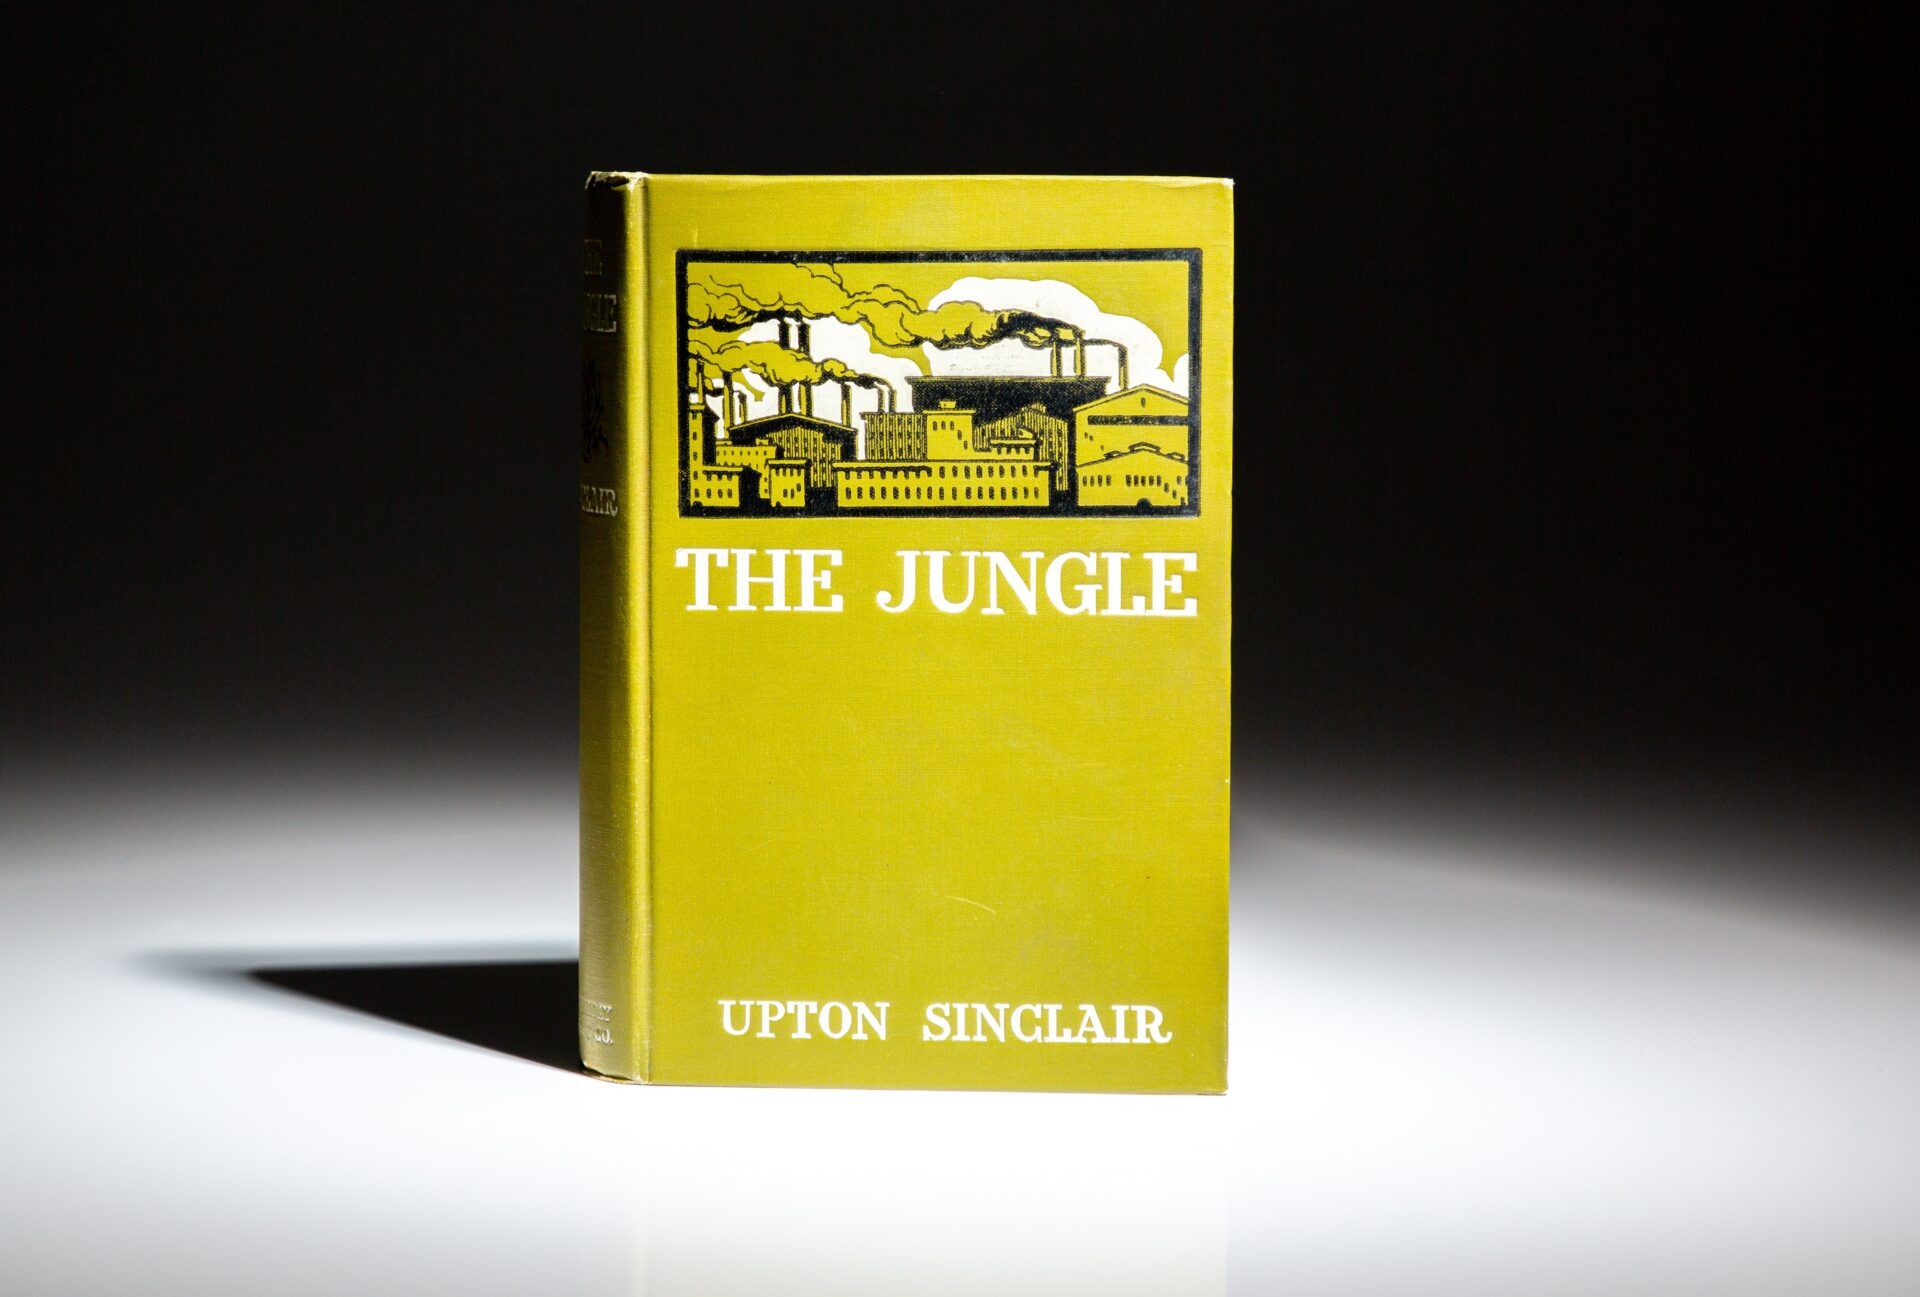 12-extraordinary-facts-about-the-jungle-upton-sinclair